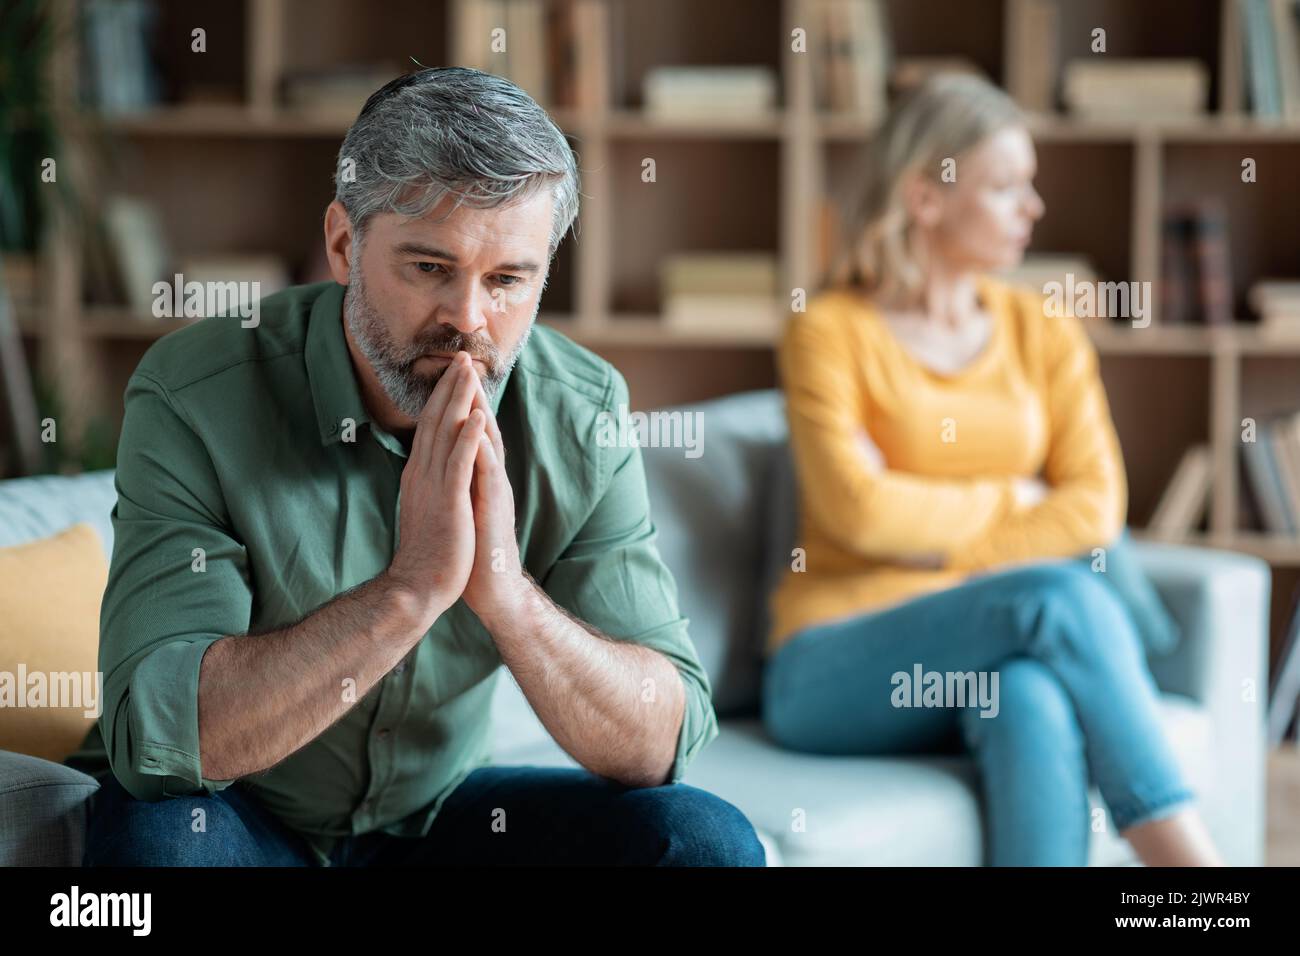 Marriage Problems. Middle Aged Wife And Husband Upset After Quarrel At Home Stock Photo